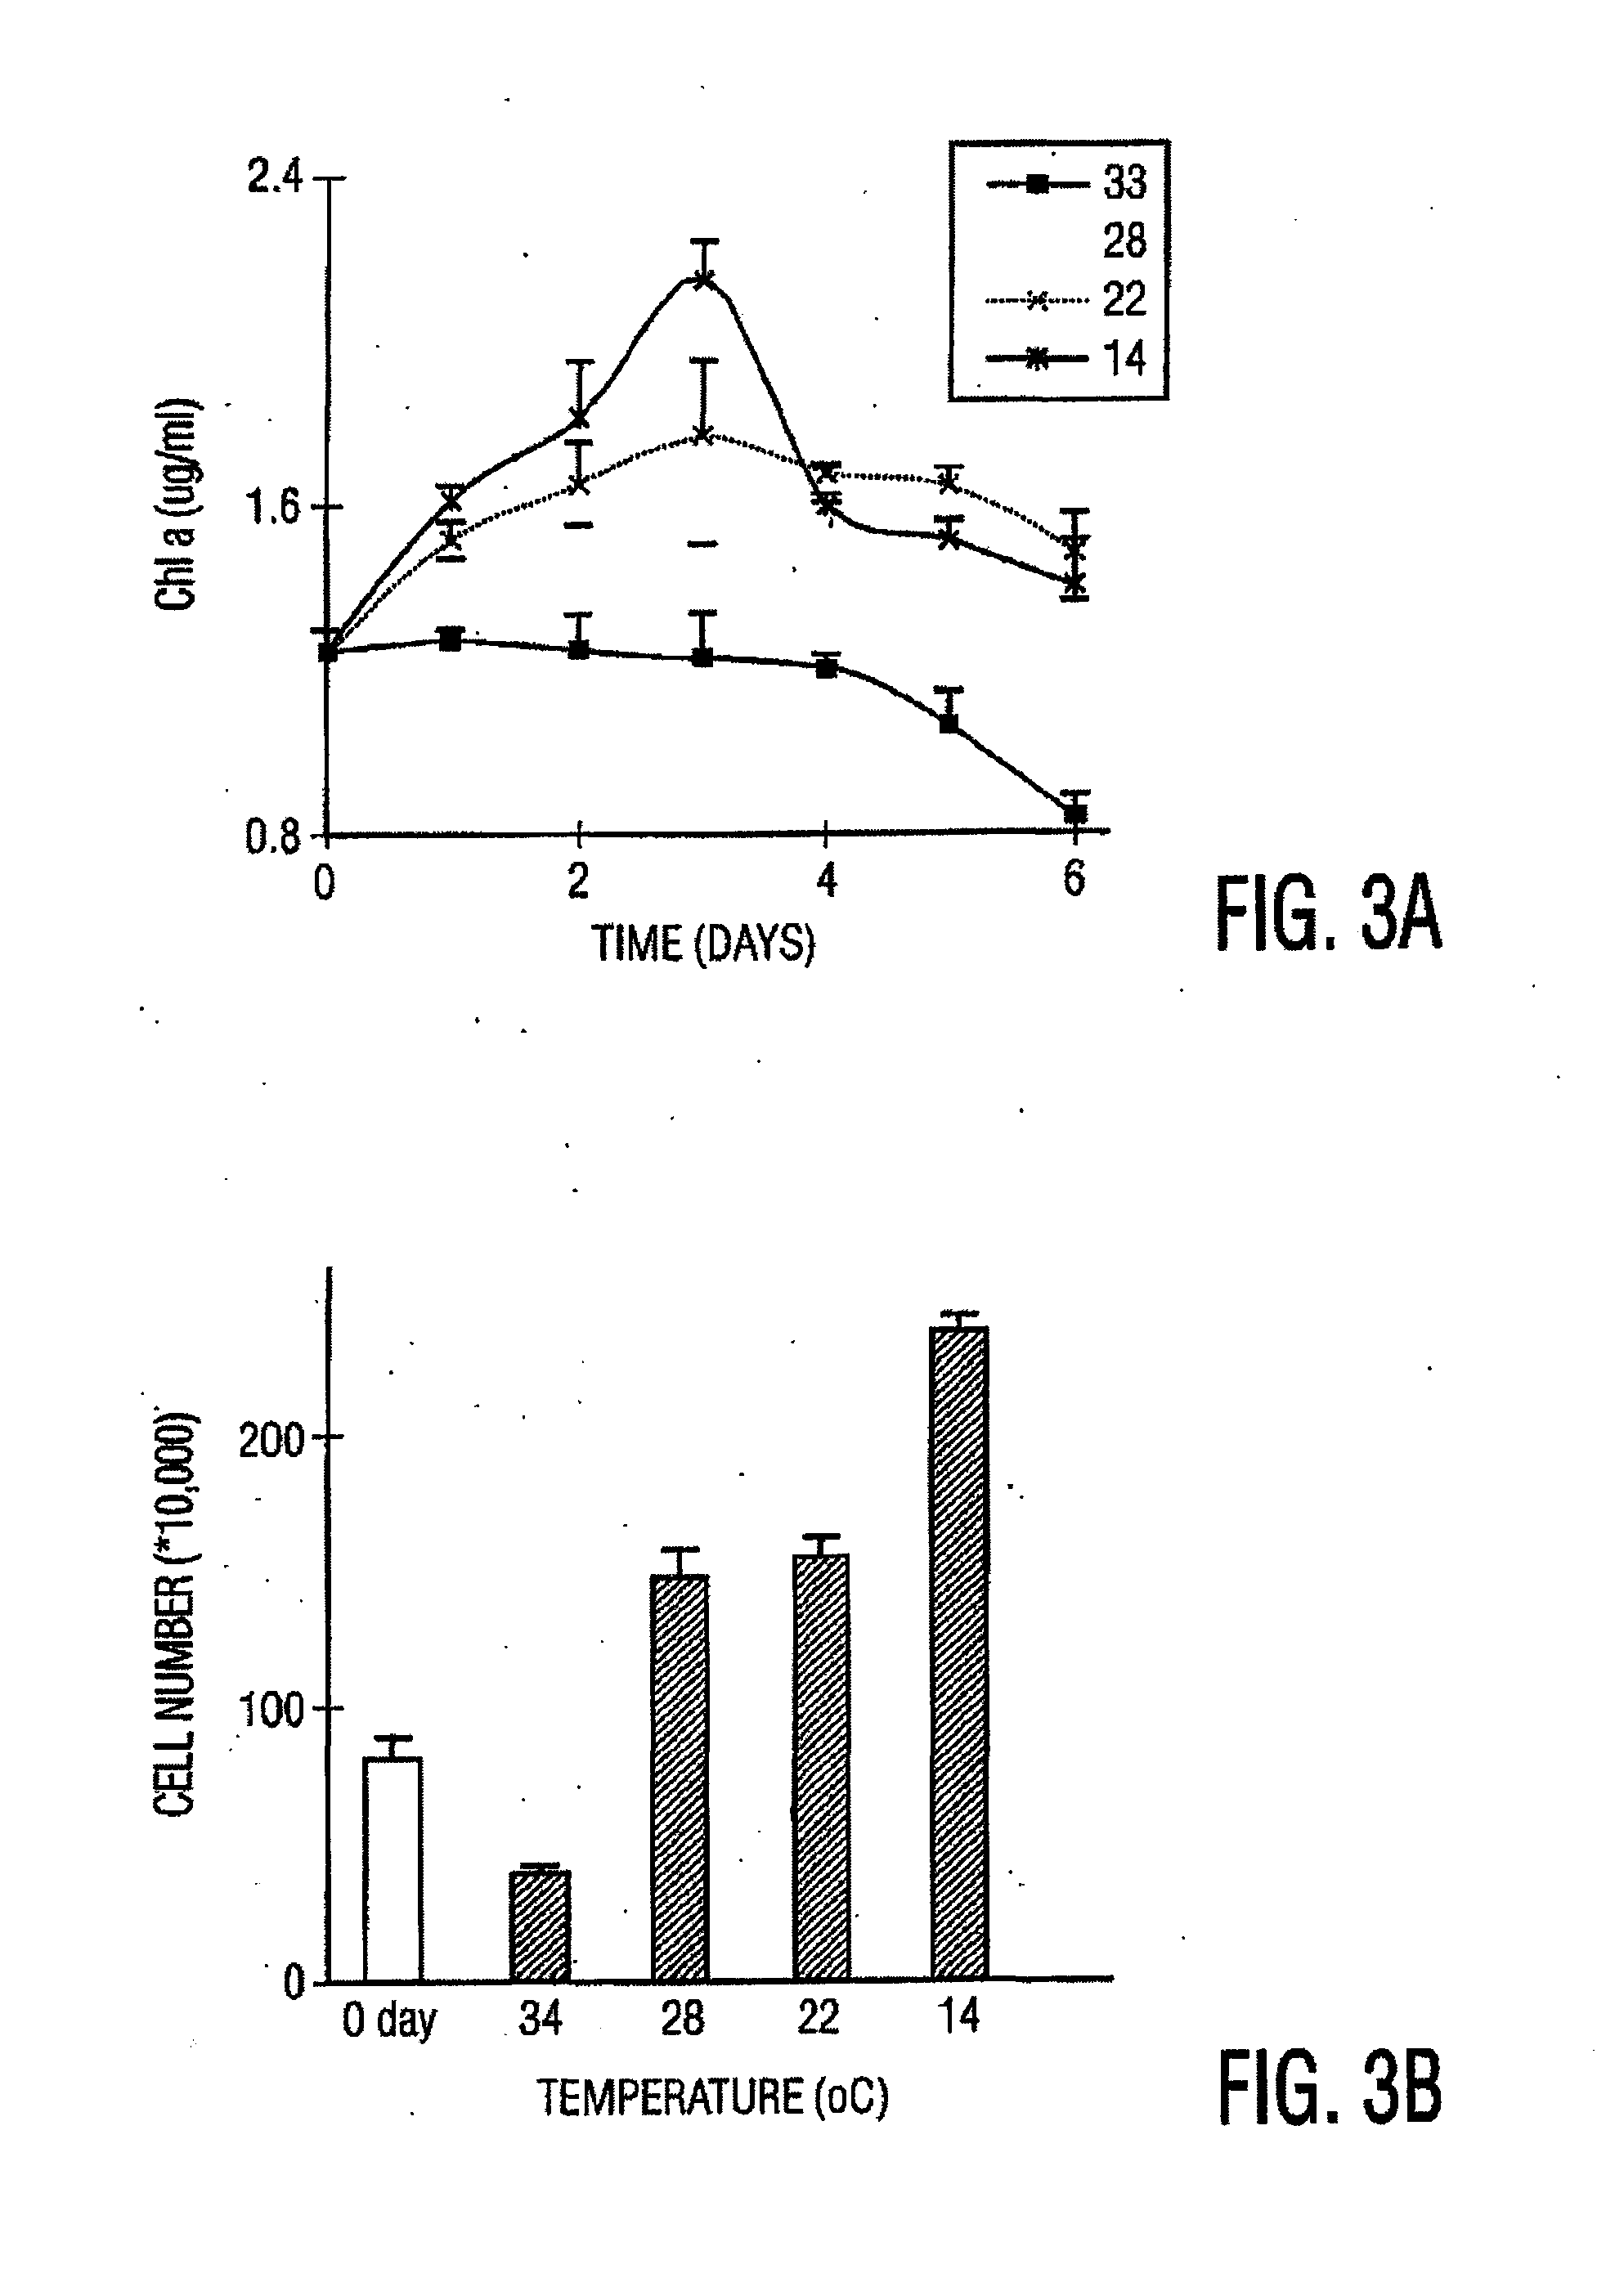 Compositions, Methods, and Kits for Polyunsaturated Fatty Acids from Microalgae